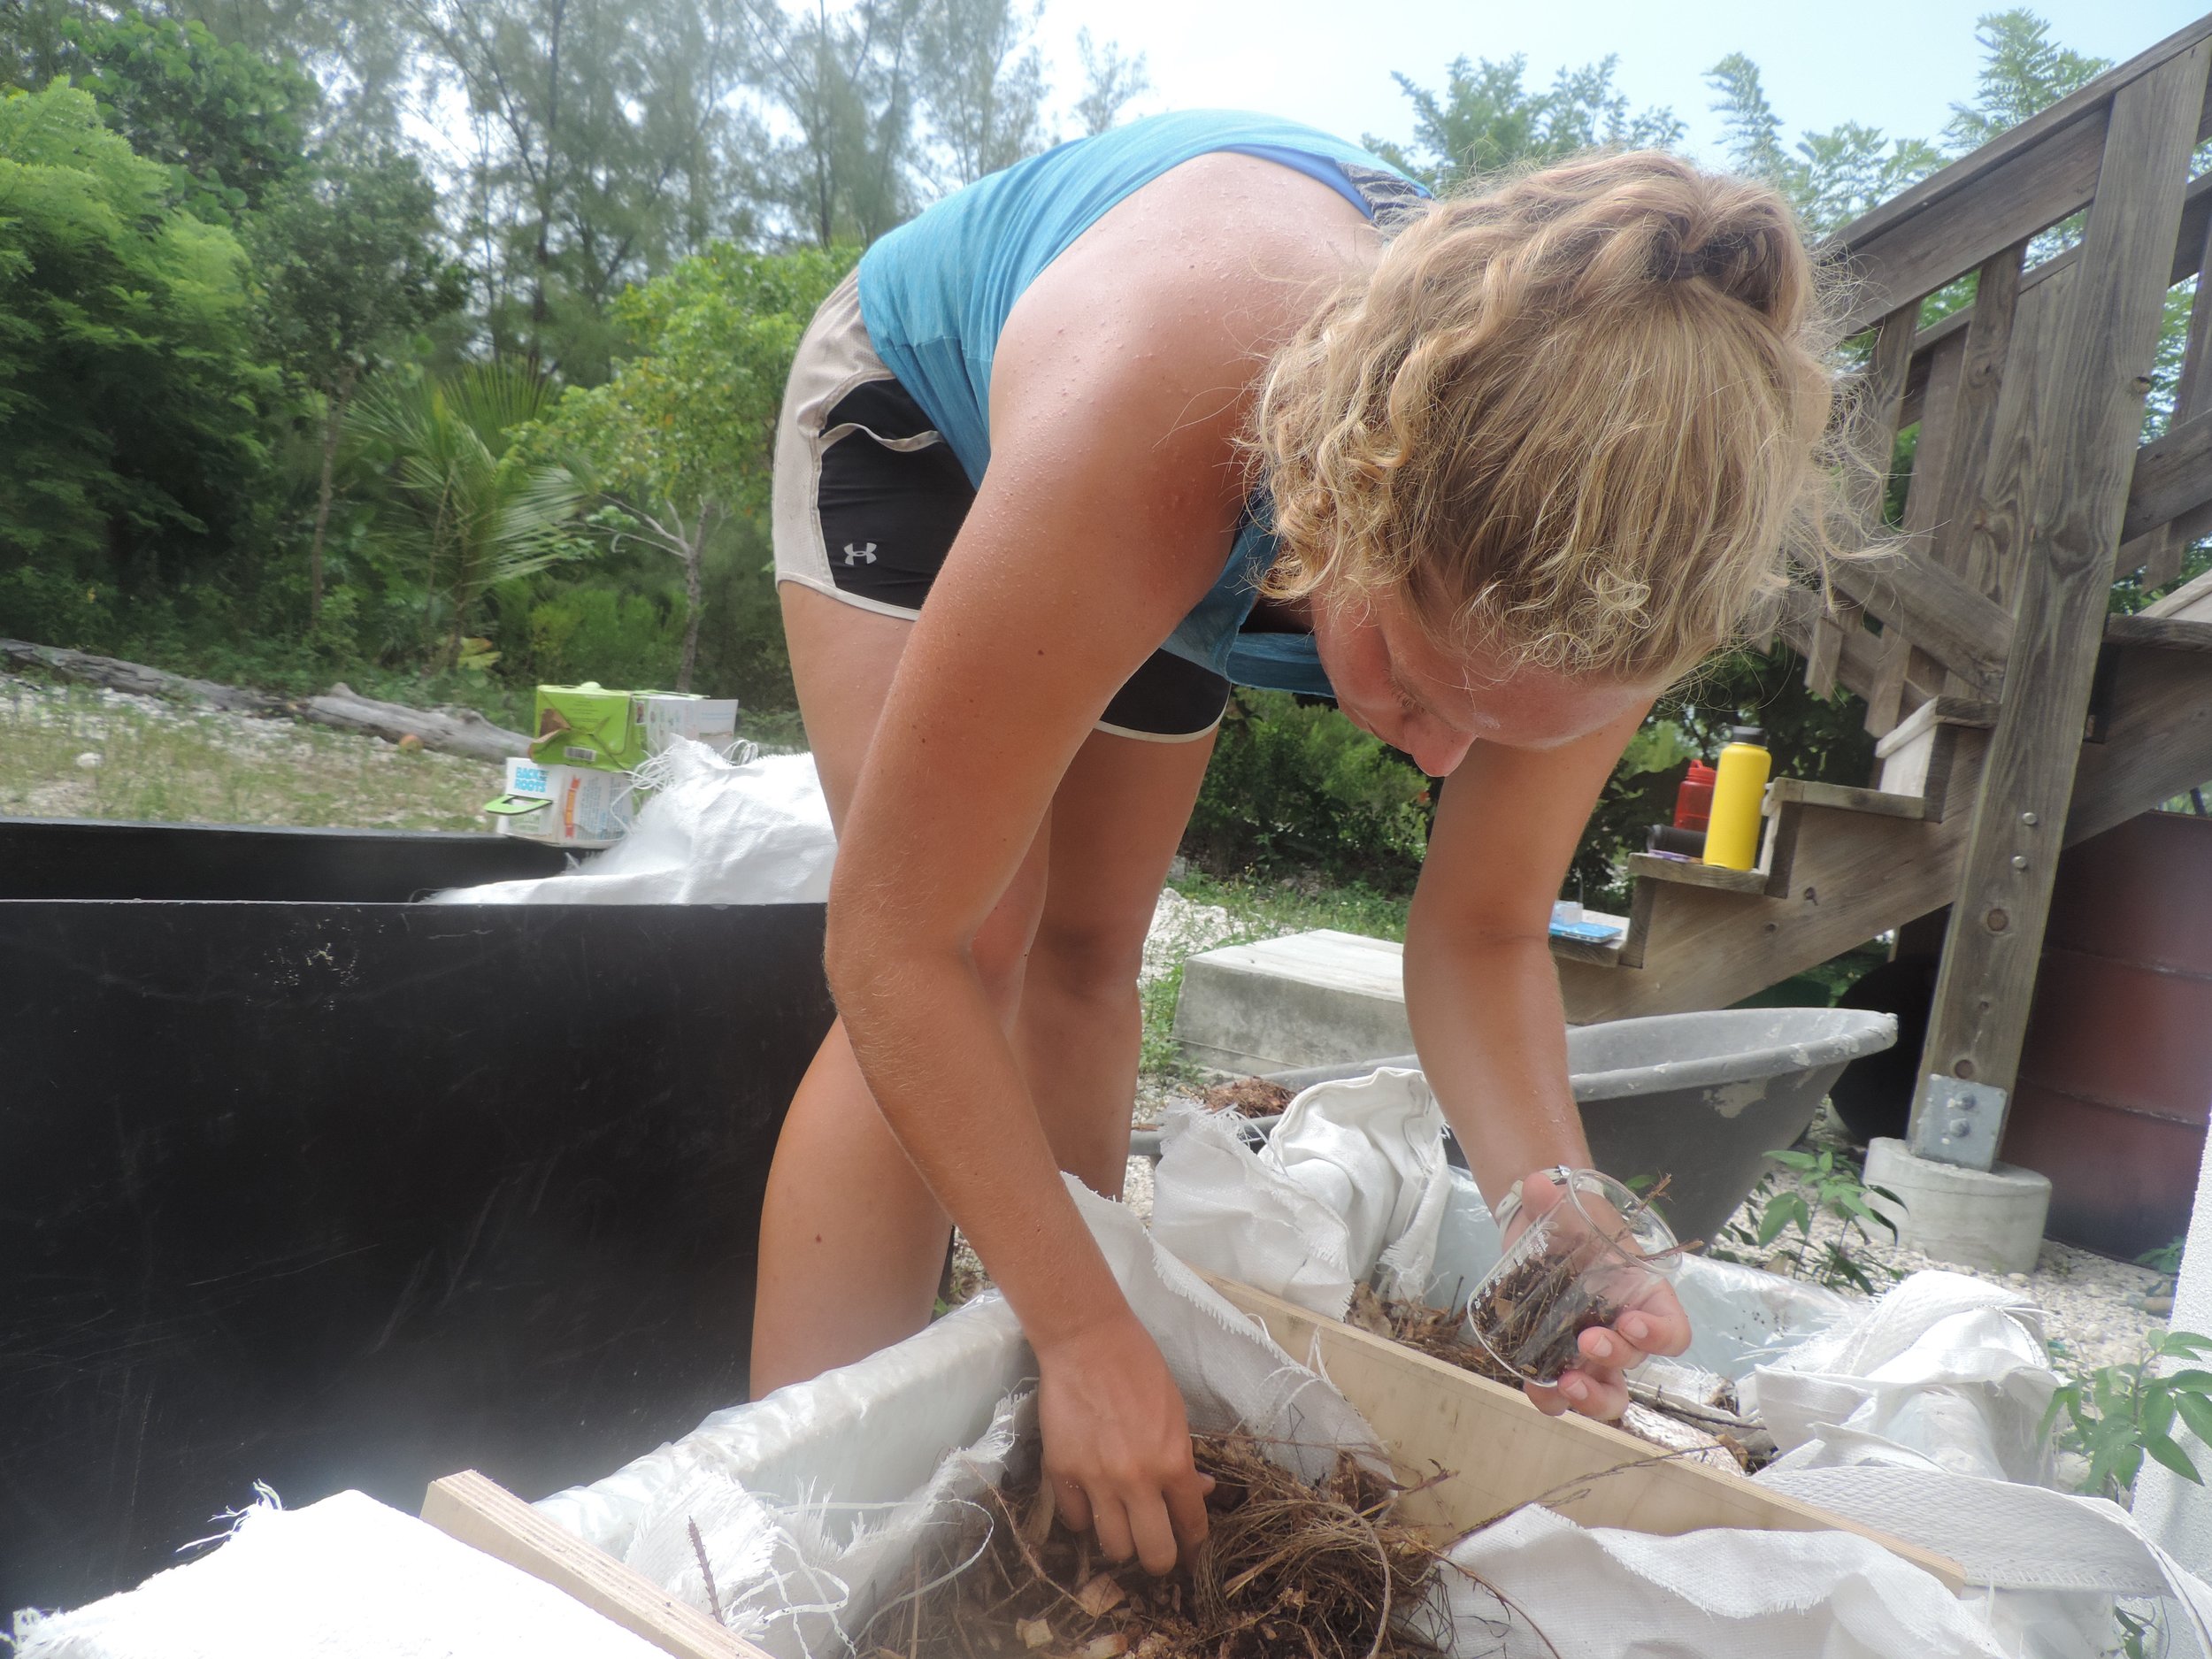 Kelly collects samples of soil and wood chips for preliminary testing of the glycerol and pH levels in the soil.